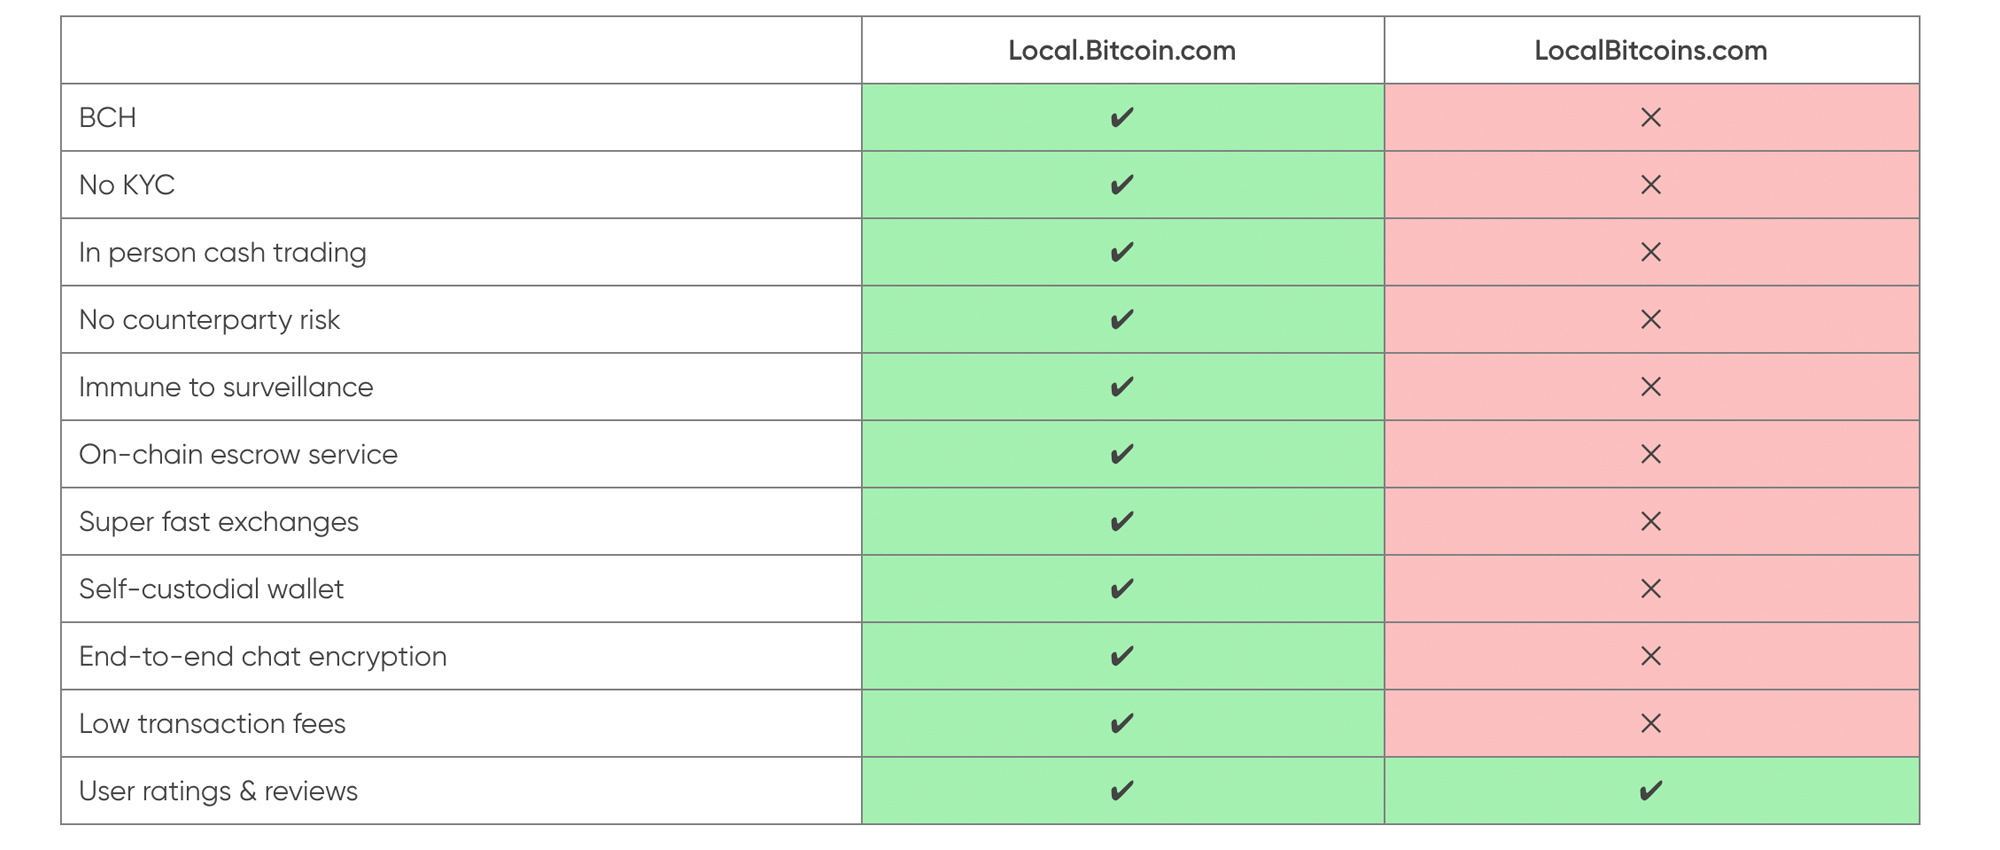 Bitcoin.com Local Gathers Steam as Other P2P Markets Falter